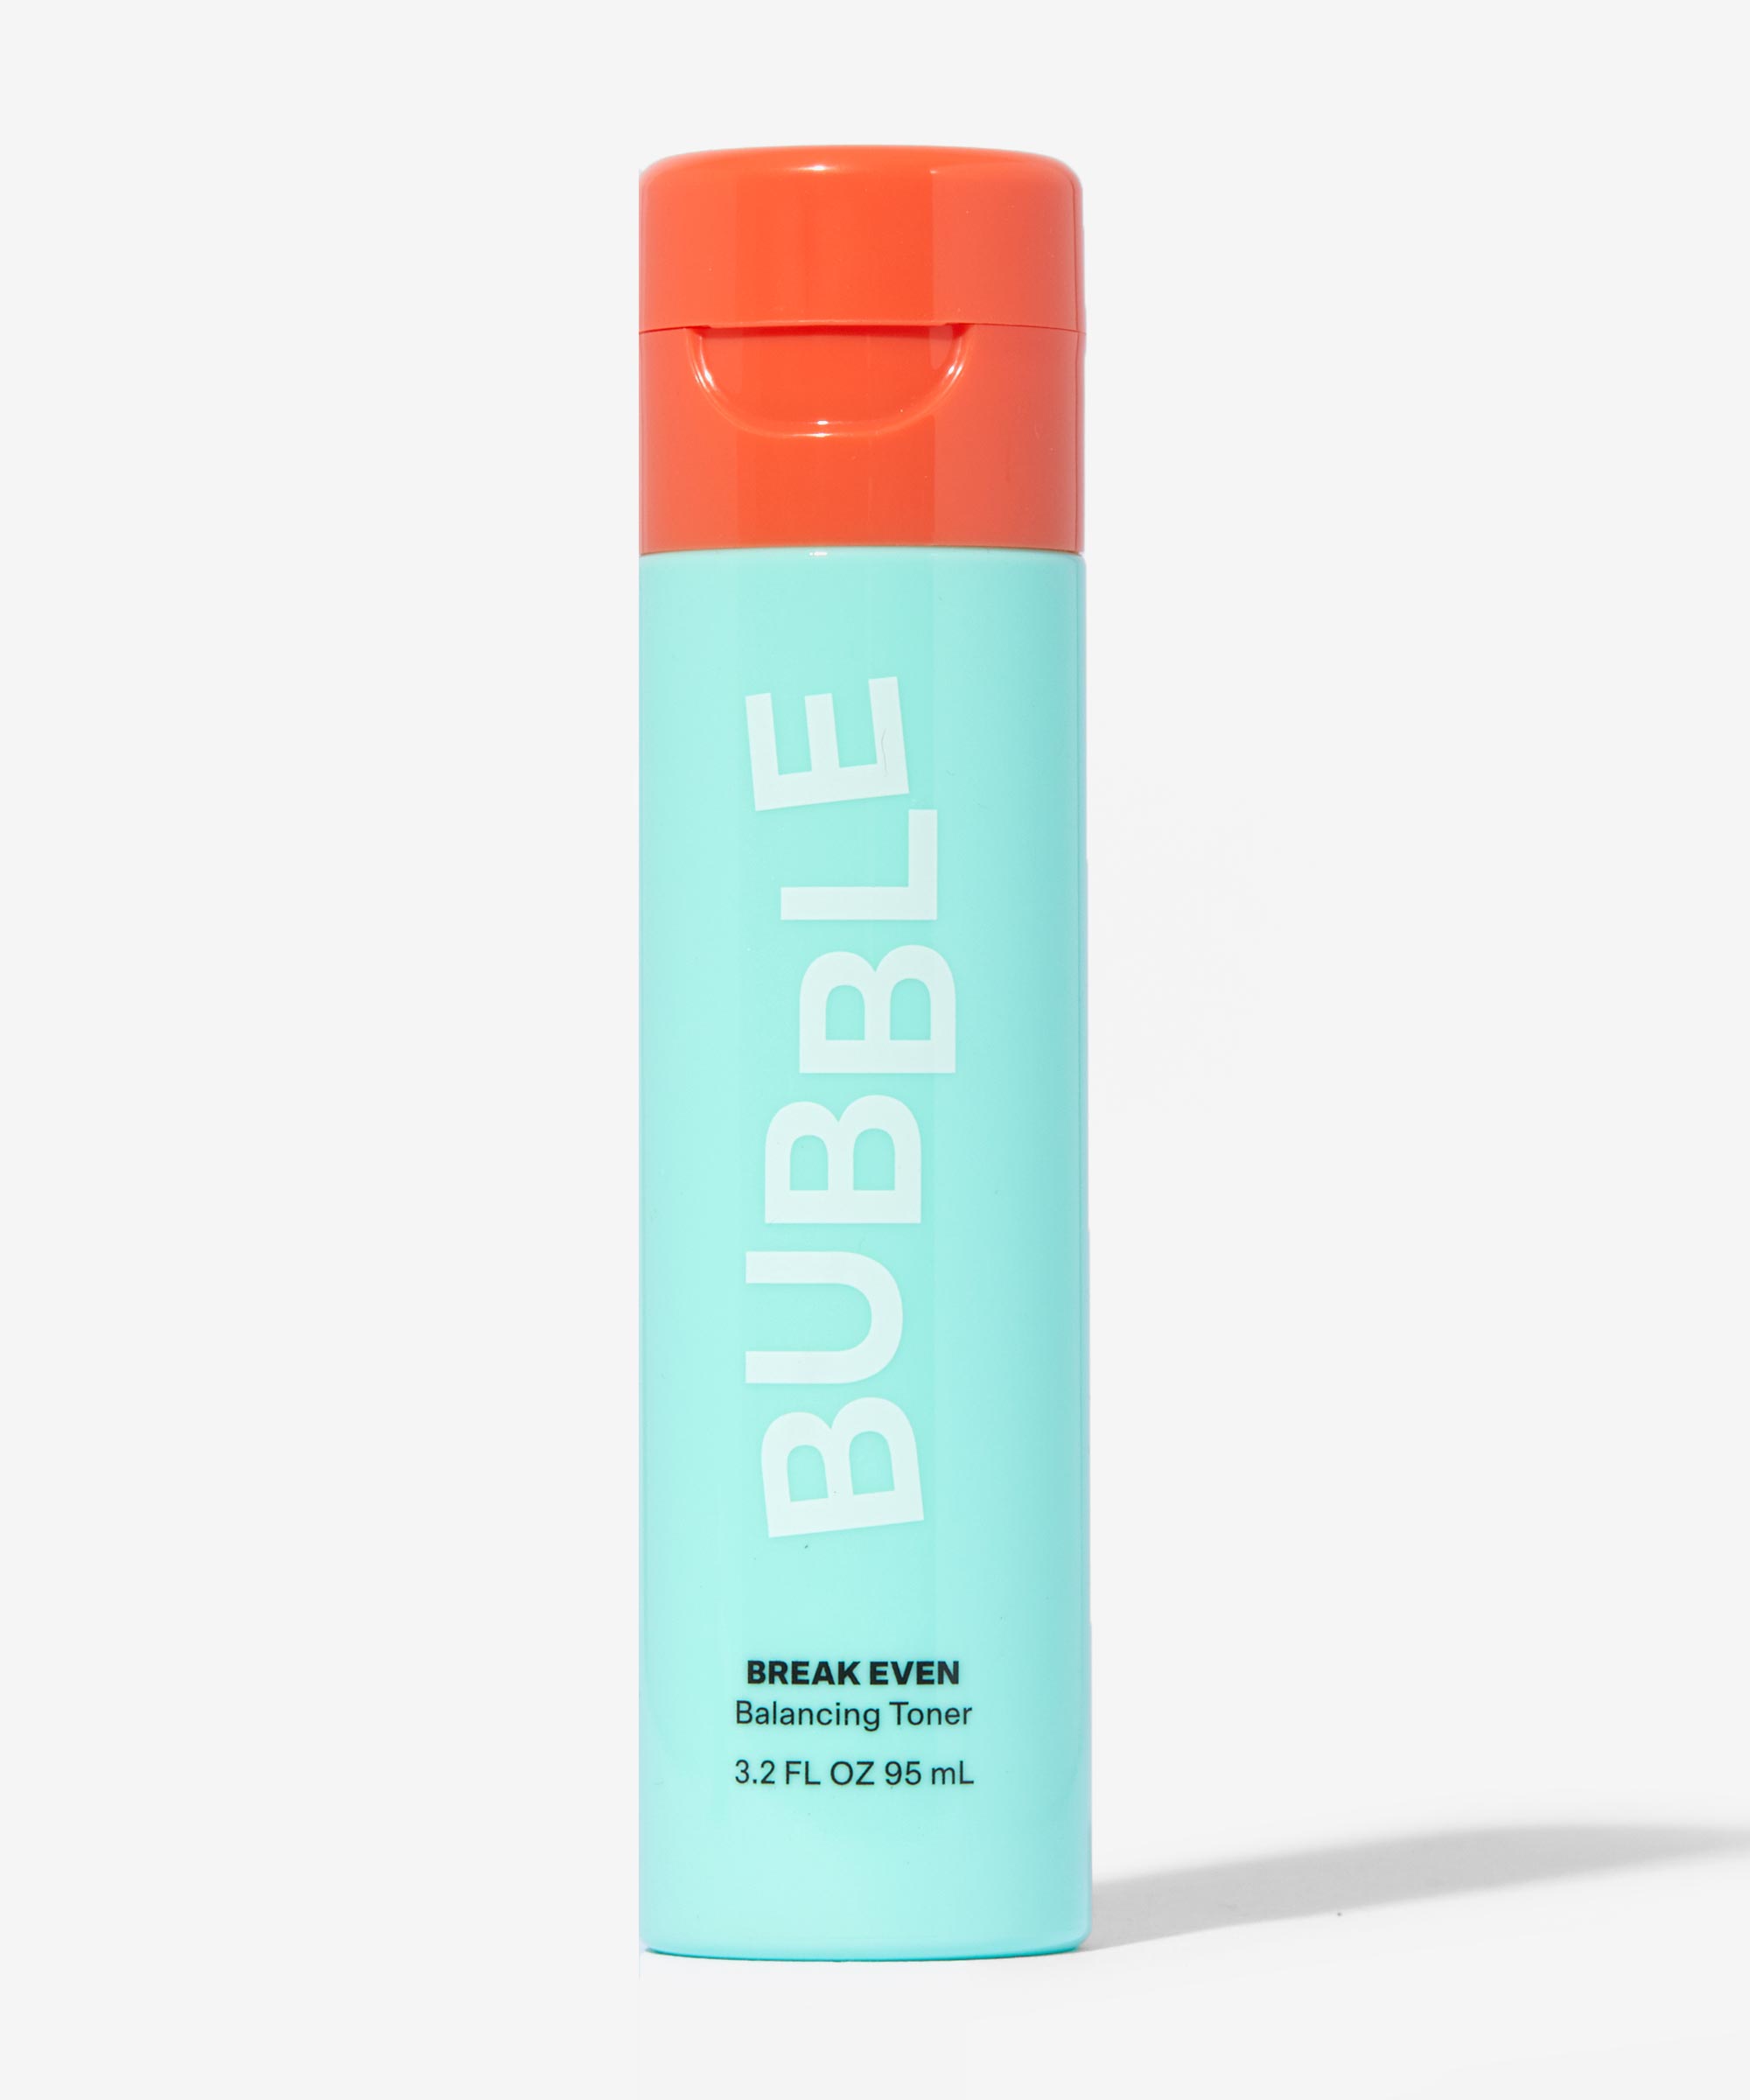 The Best Bubble Skincare Products, According To You - Beauty Bay Edited